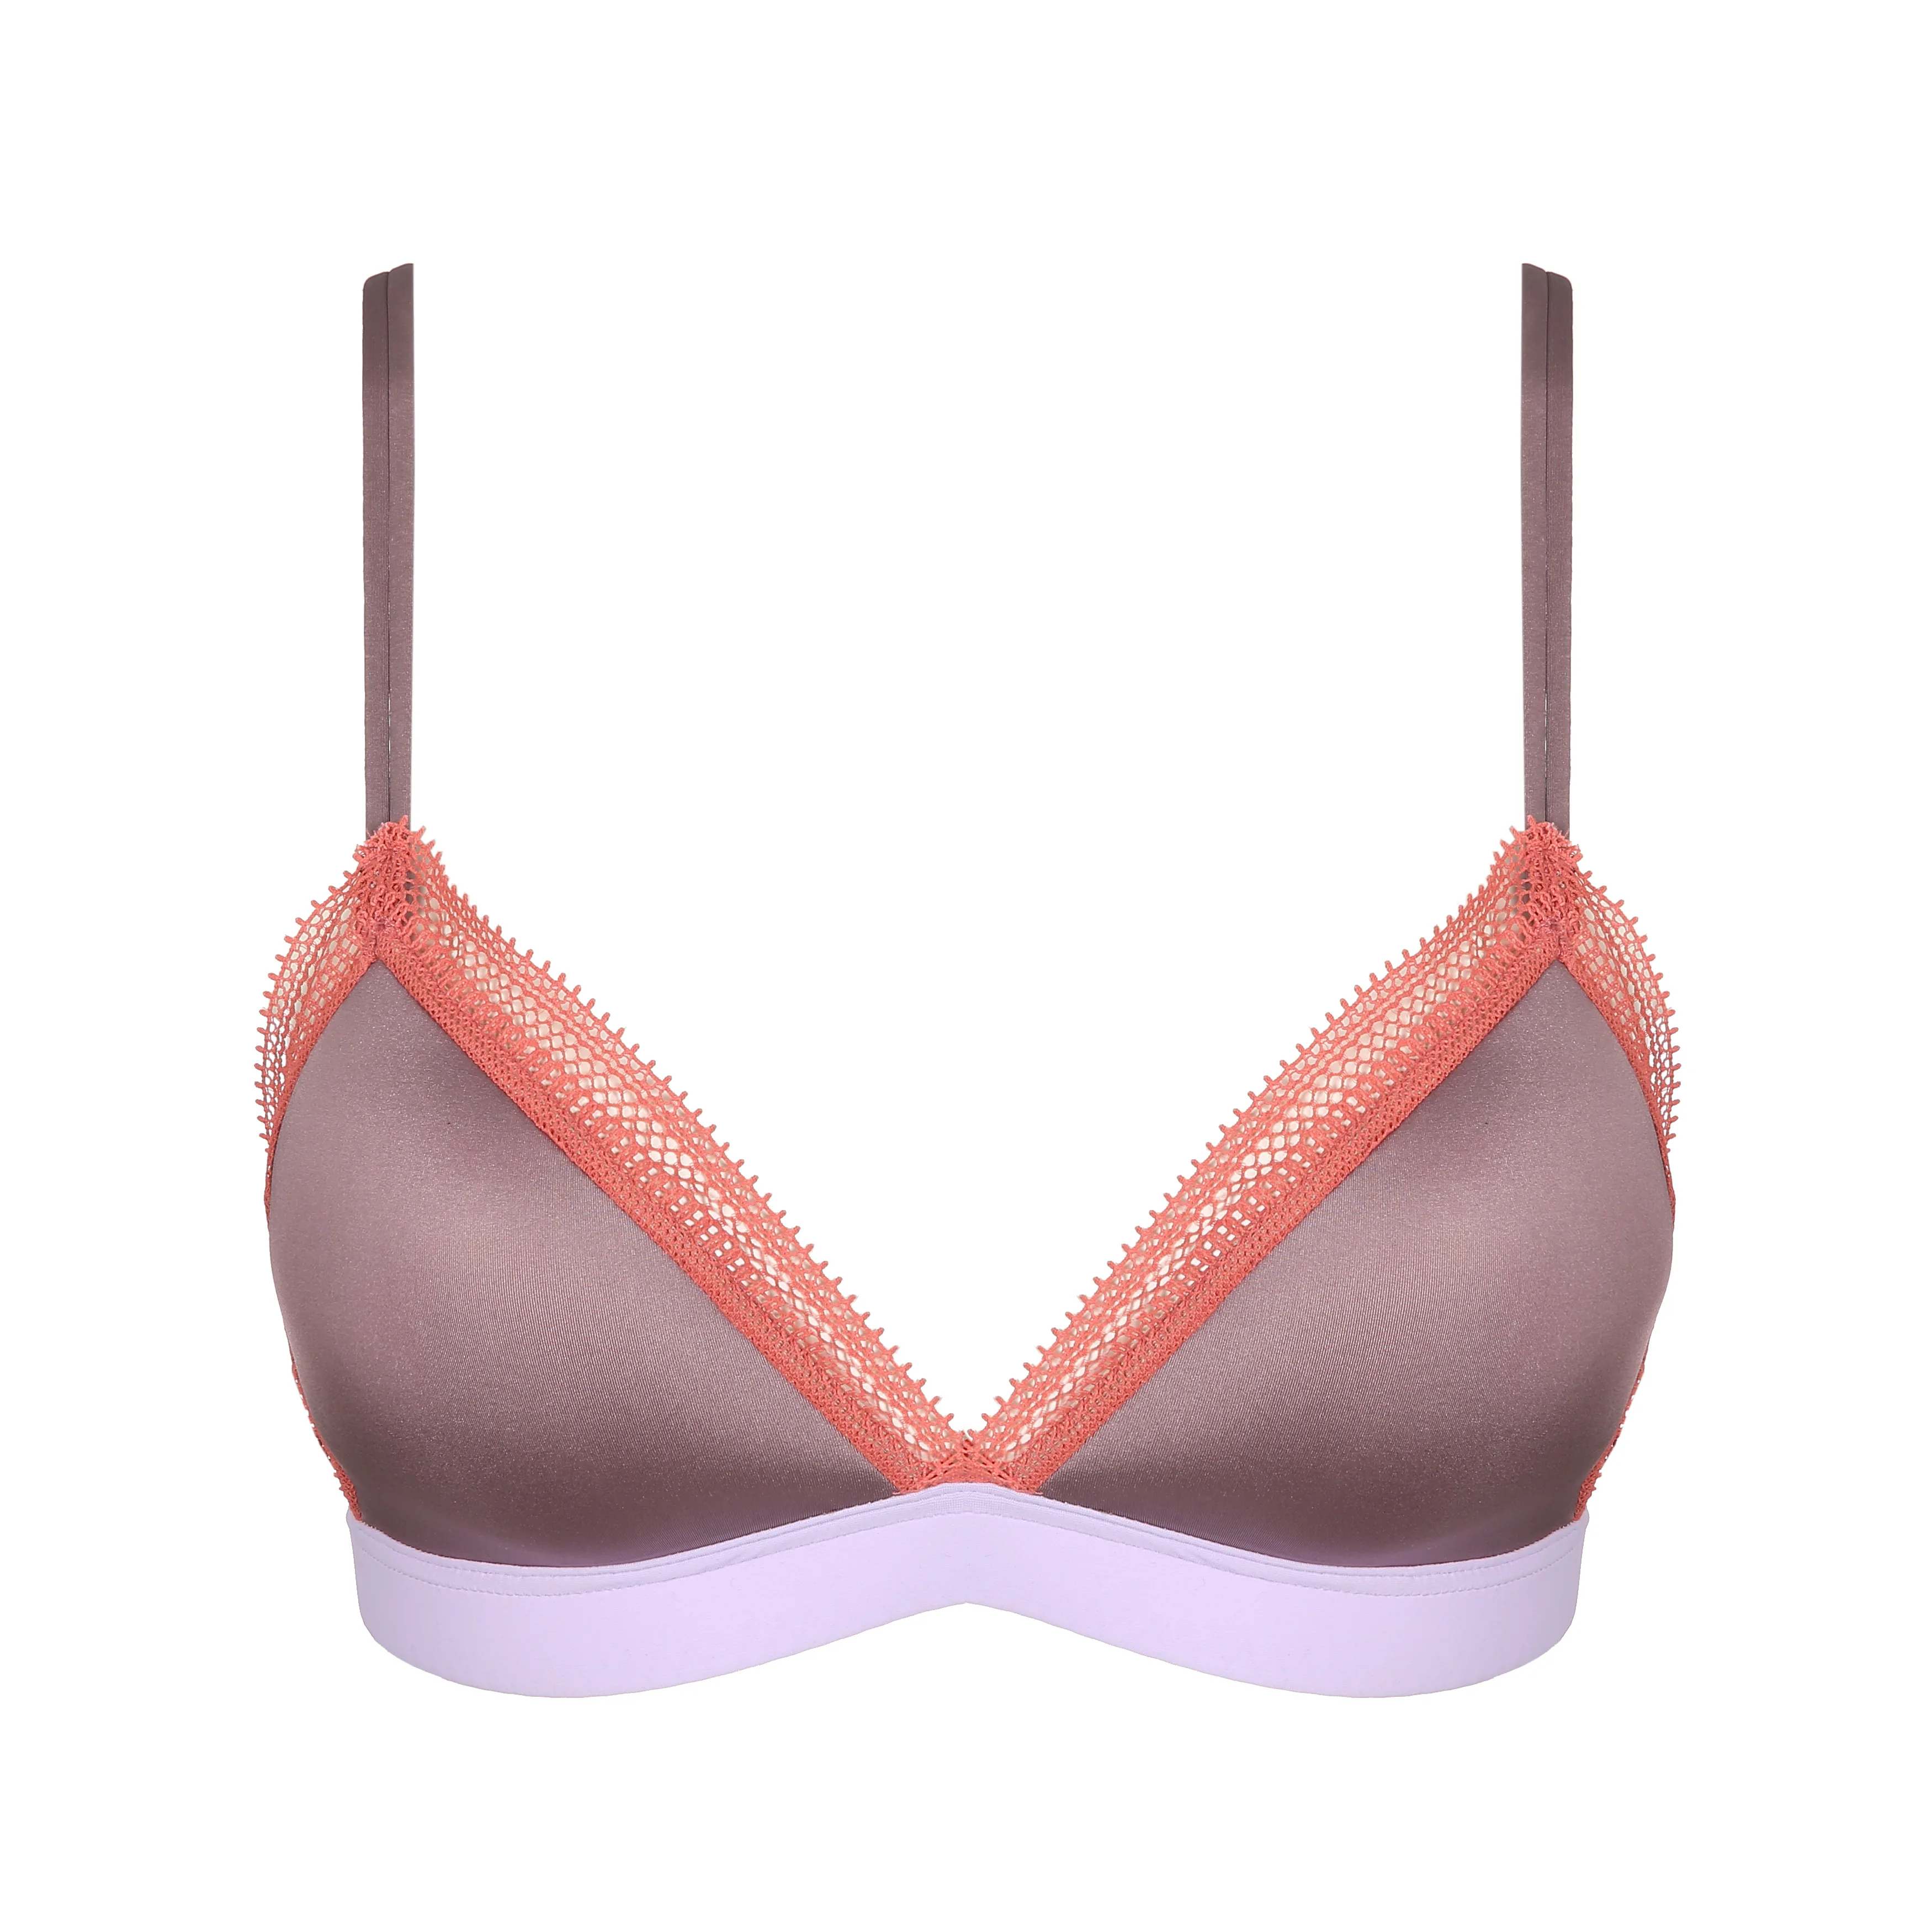 Bratte and bra triangle, satin, tulle and padded bras